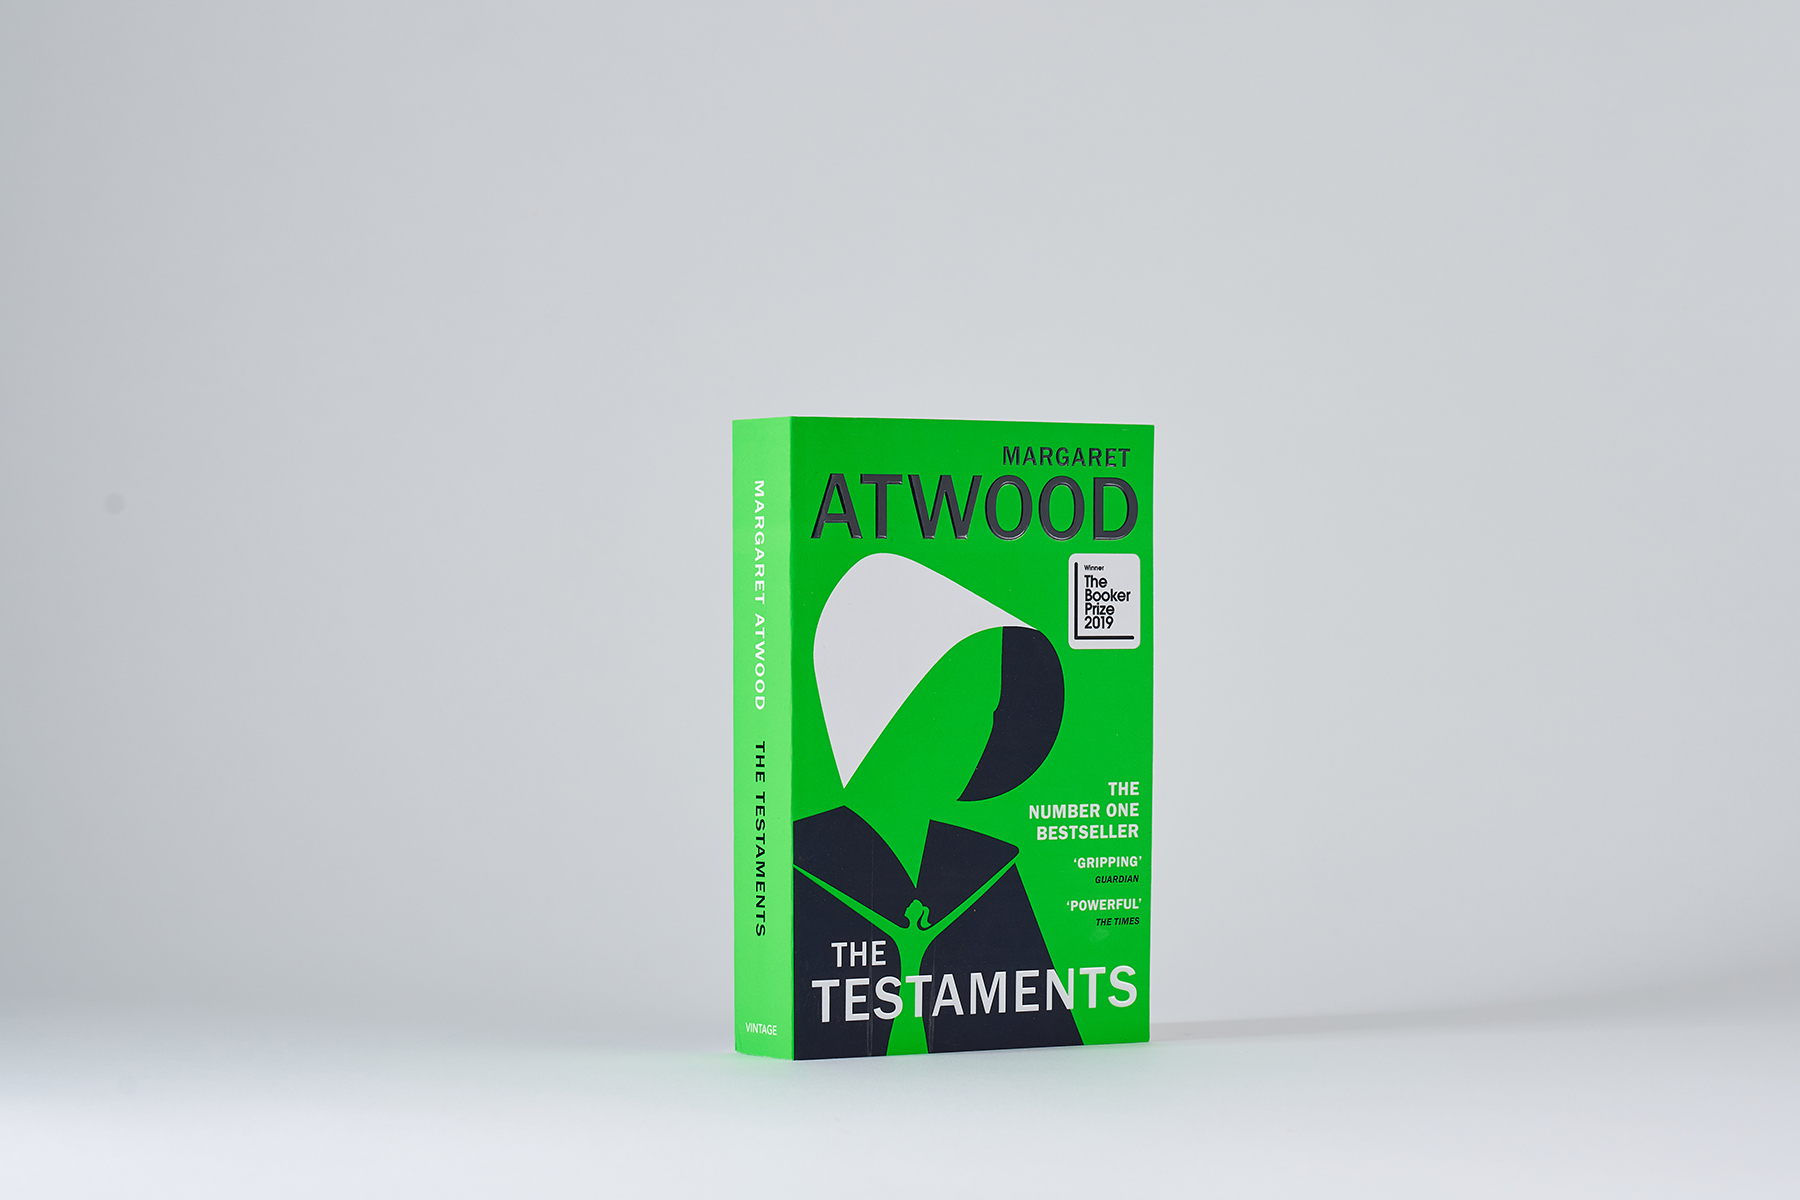 Photograph of The Testaments paperback edition against white background